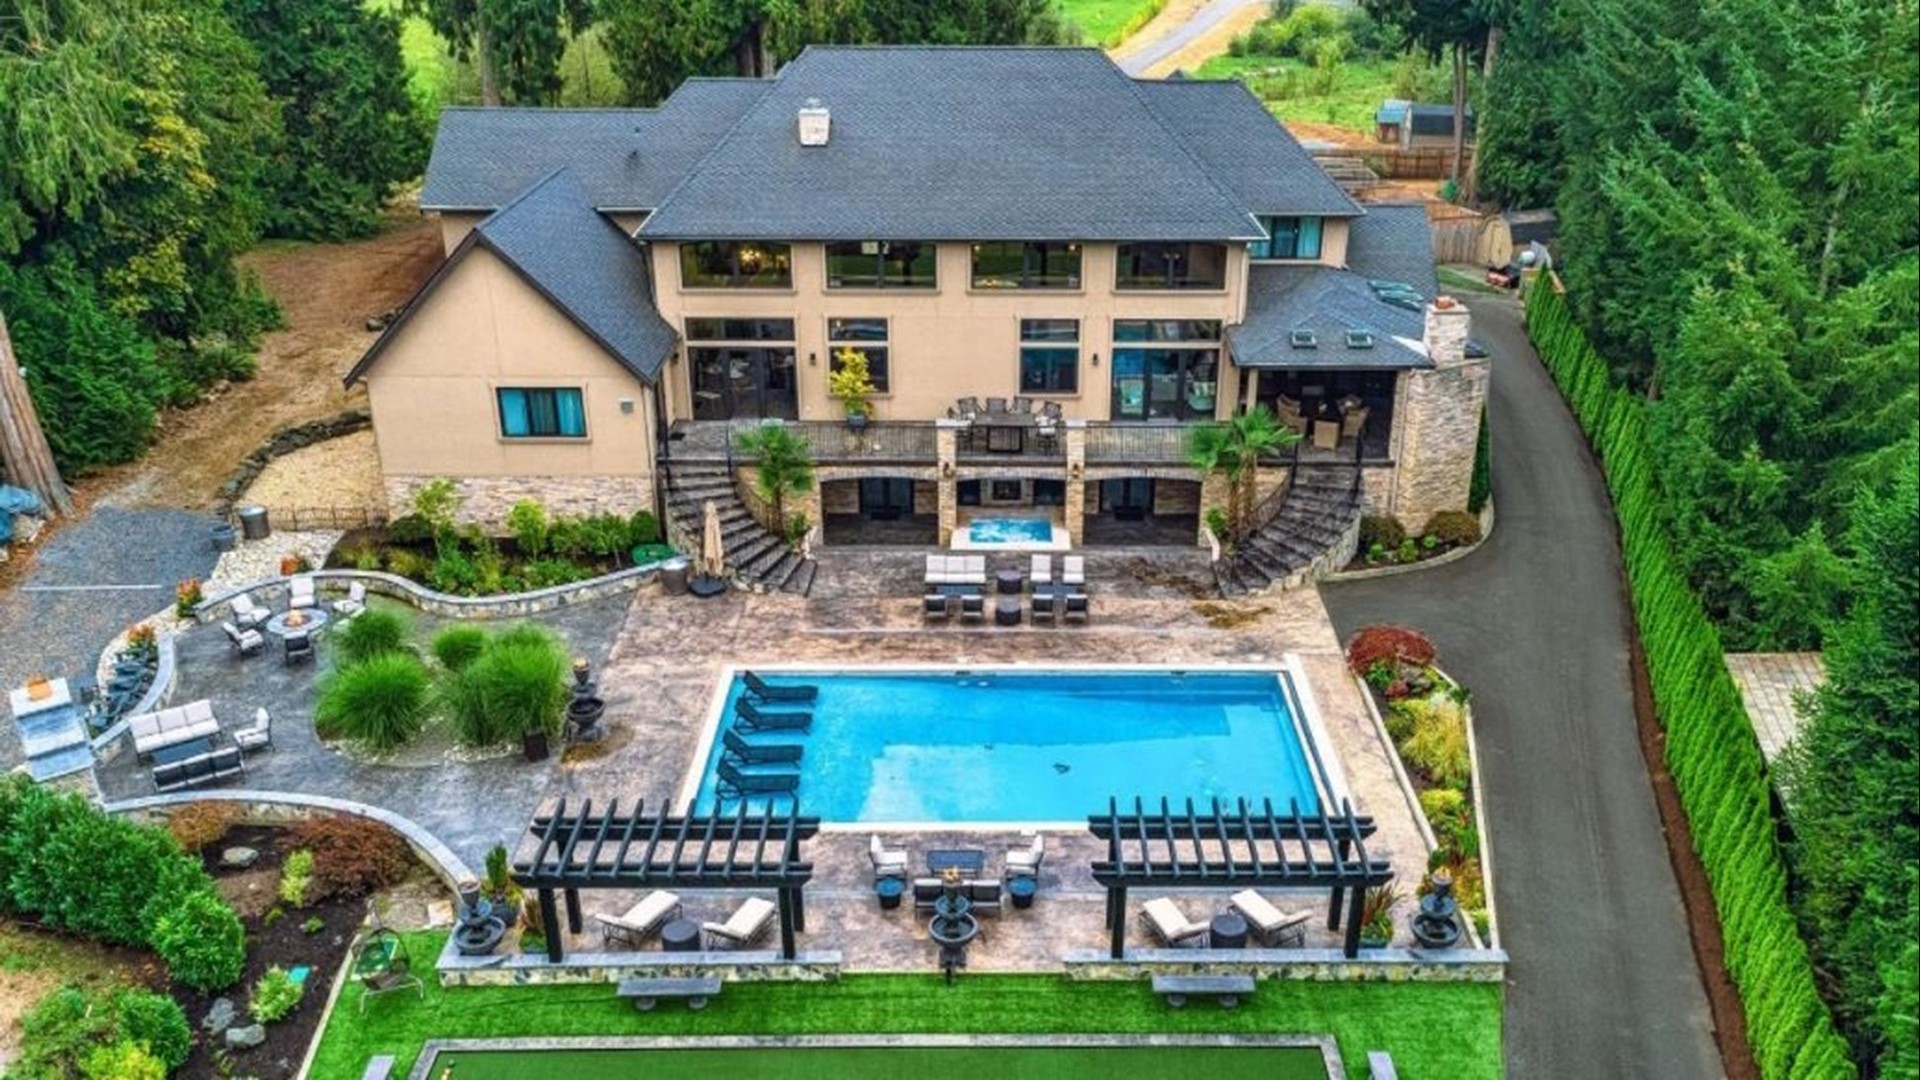 A bowling alley? A golf simulator? An indoor pickleball court? This home has it all.